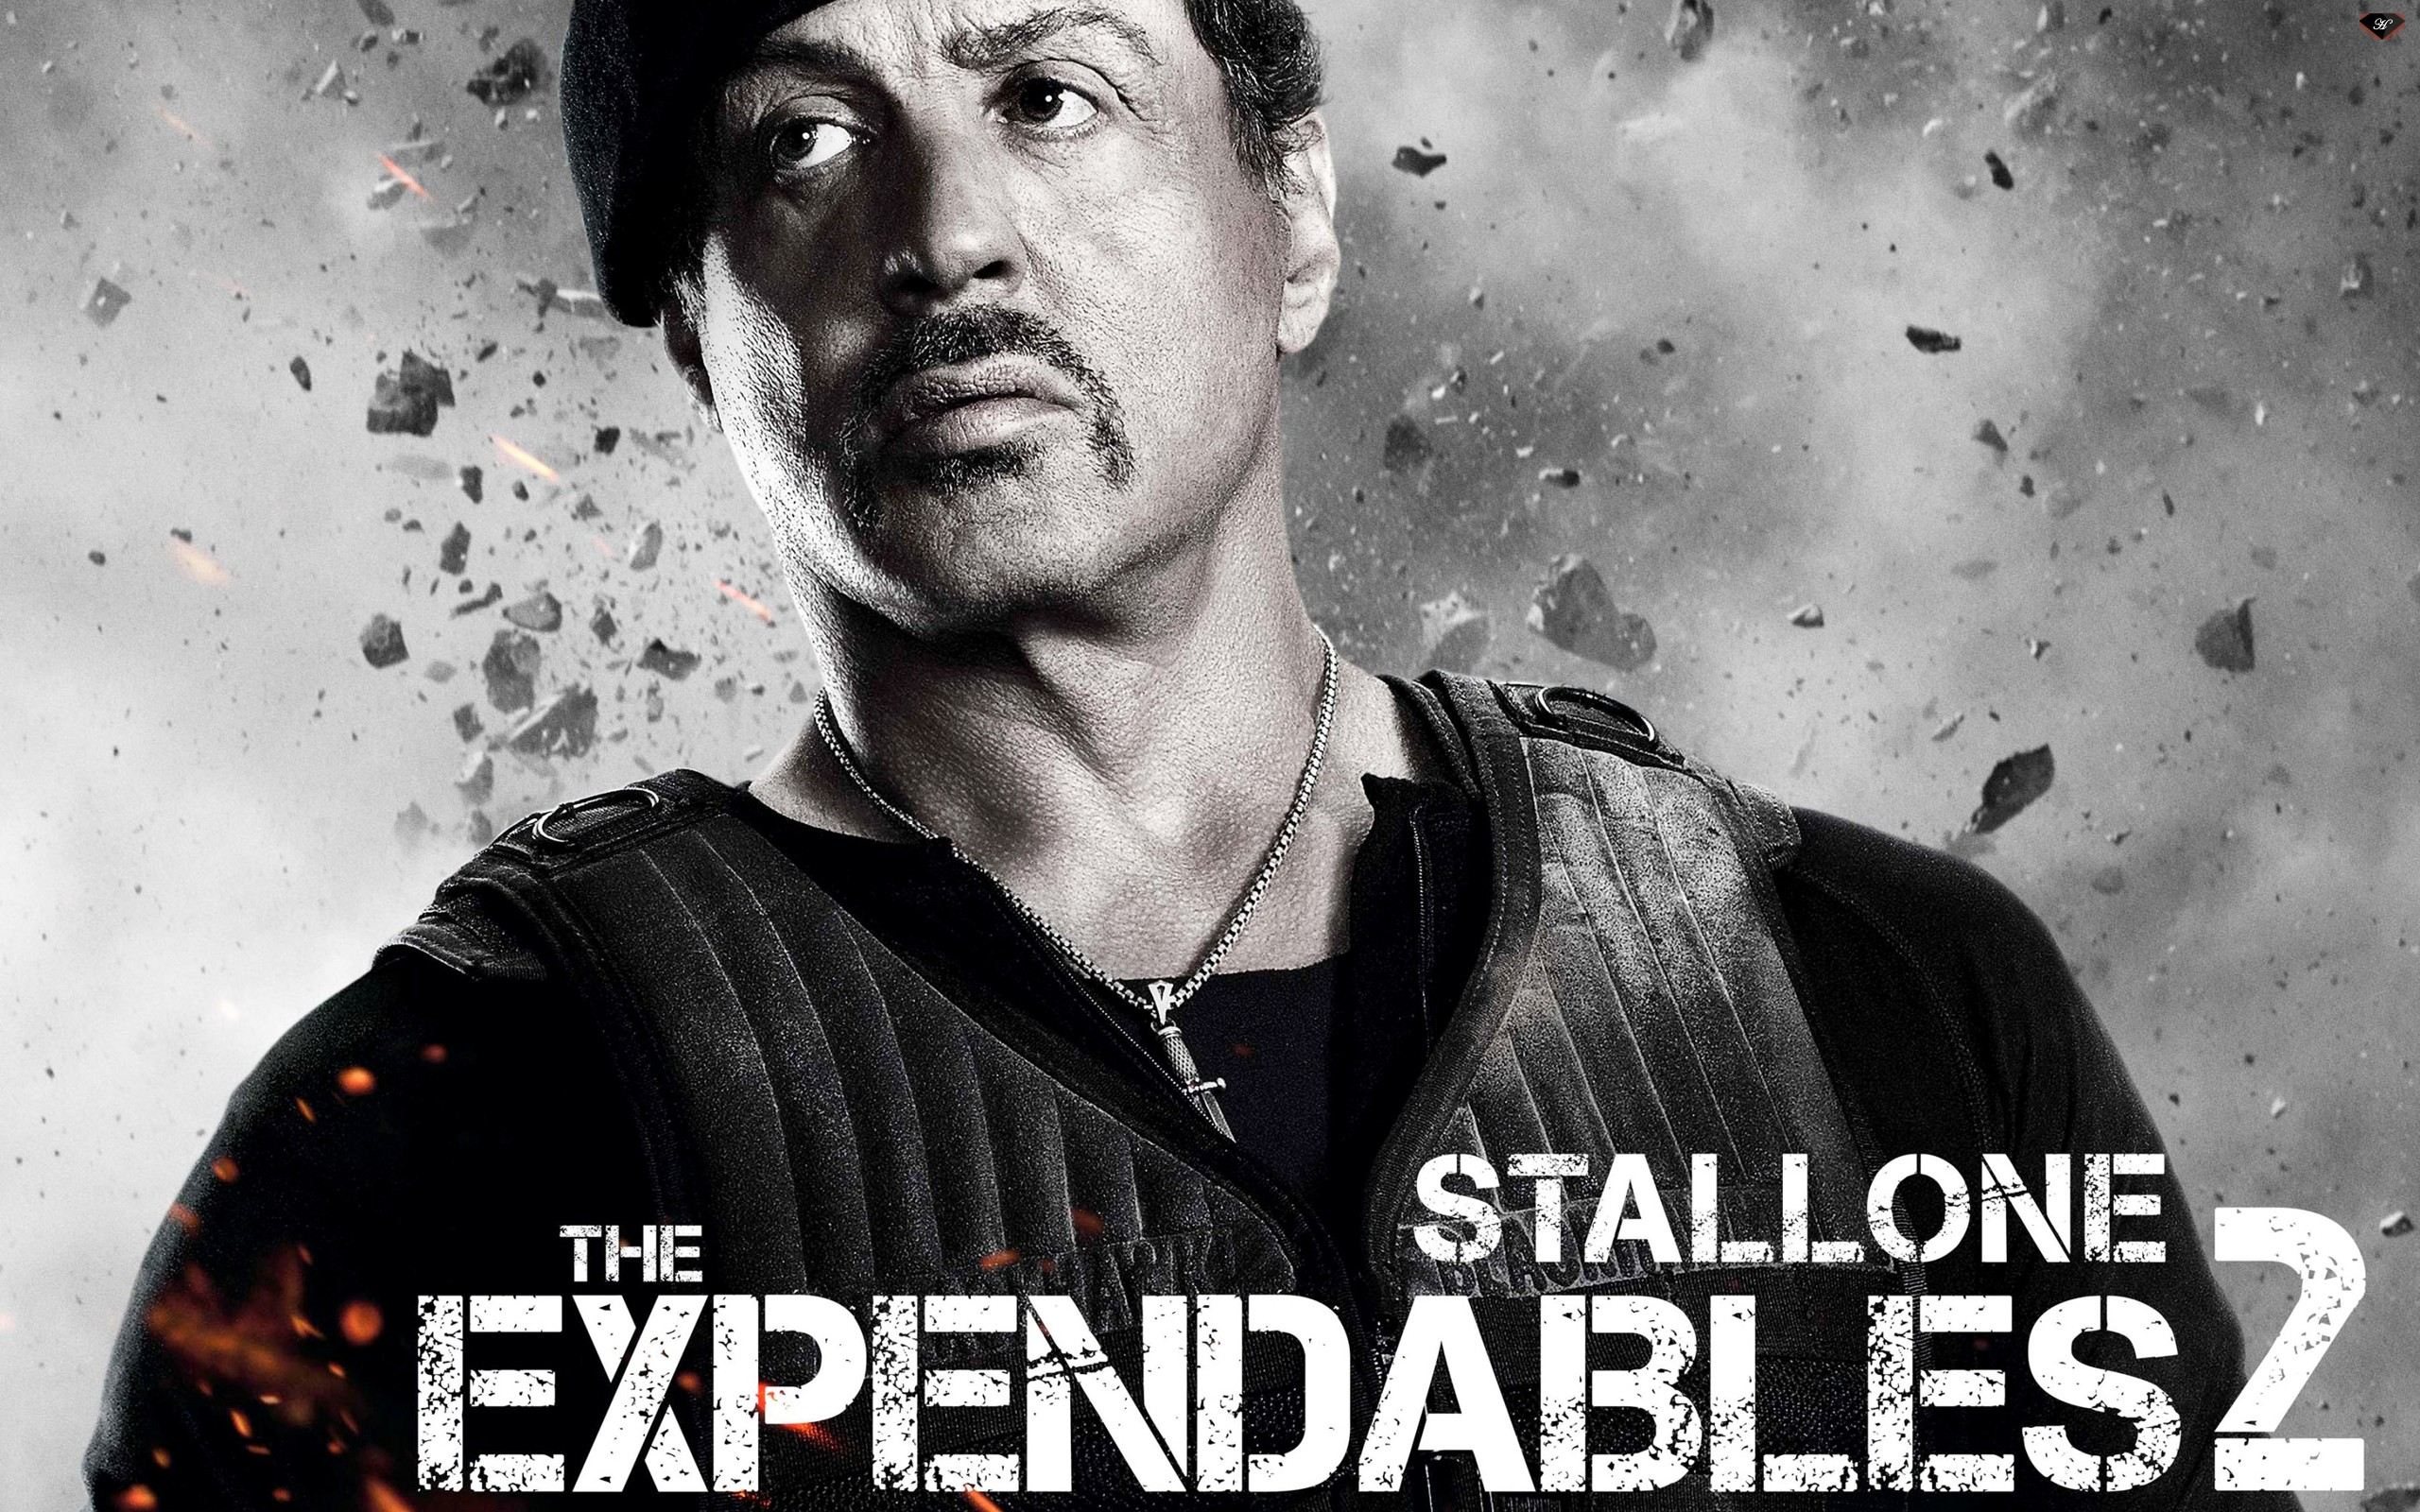 The Expendables 2 Clip “Take Your Life”